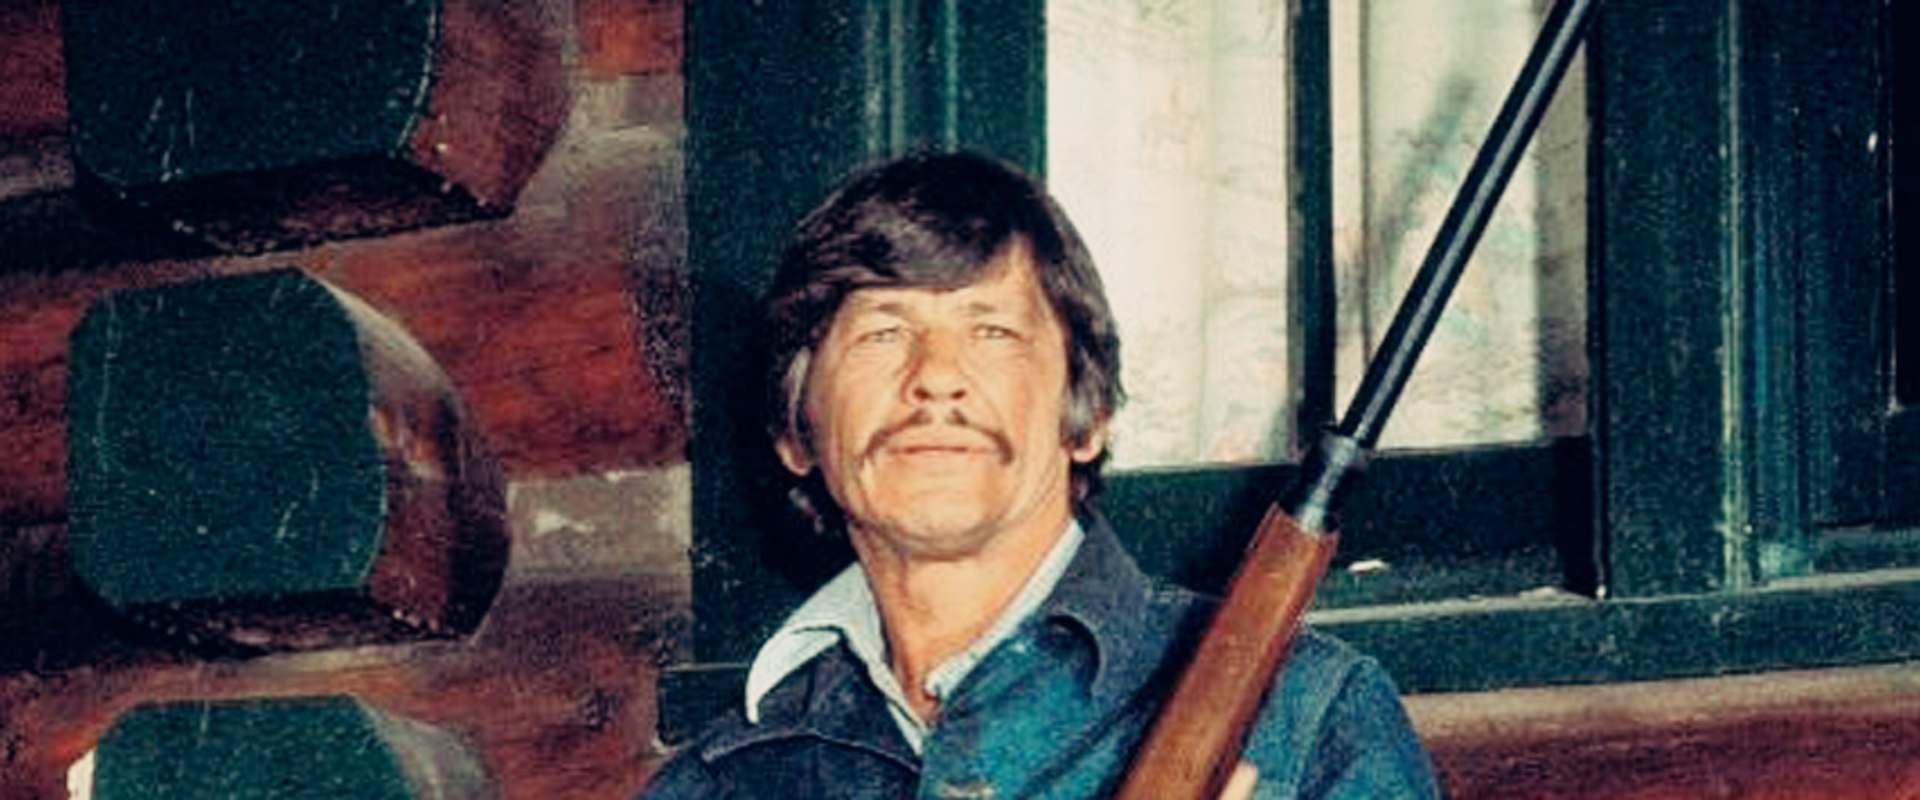 Charles Bronson: The Spirit of Masculinity background 1